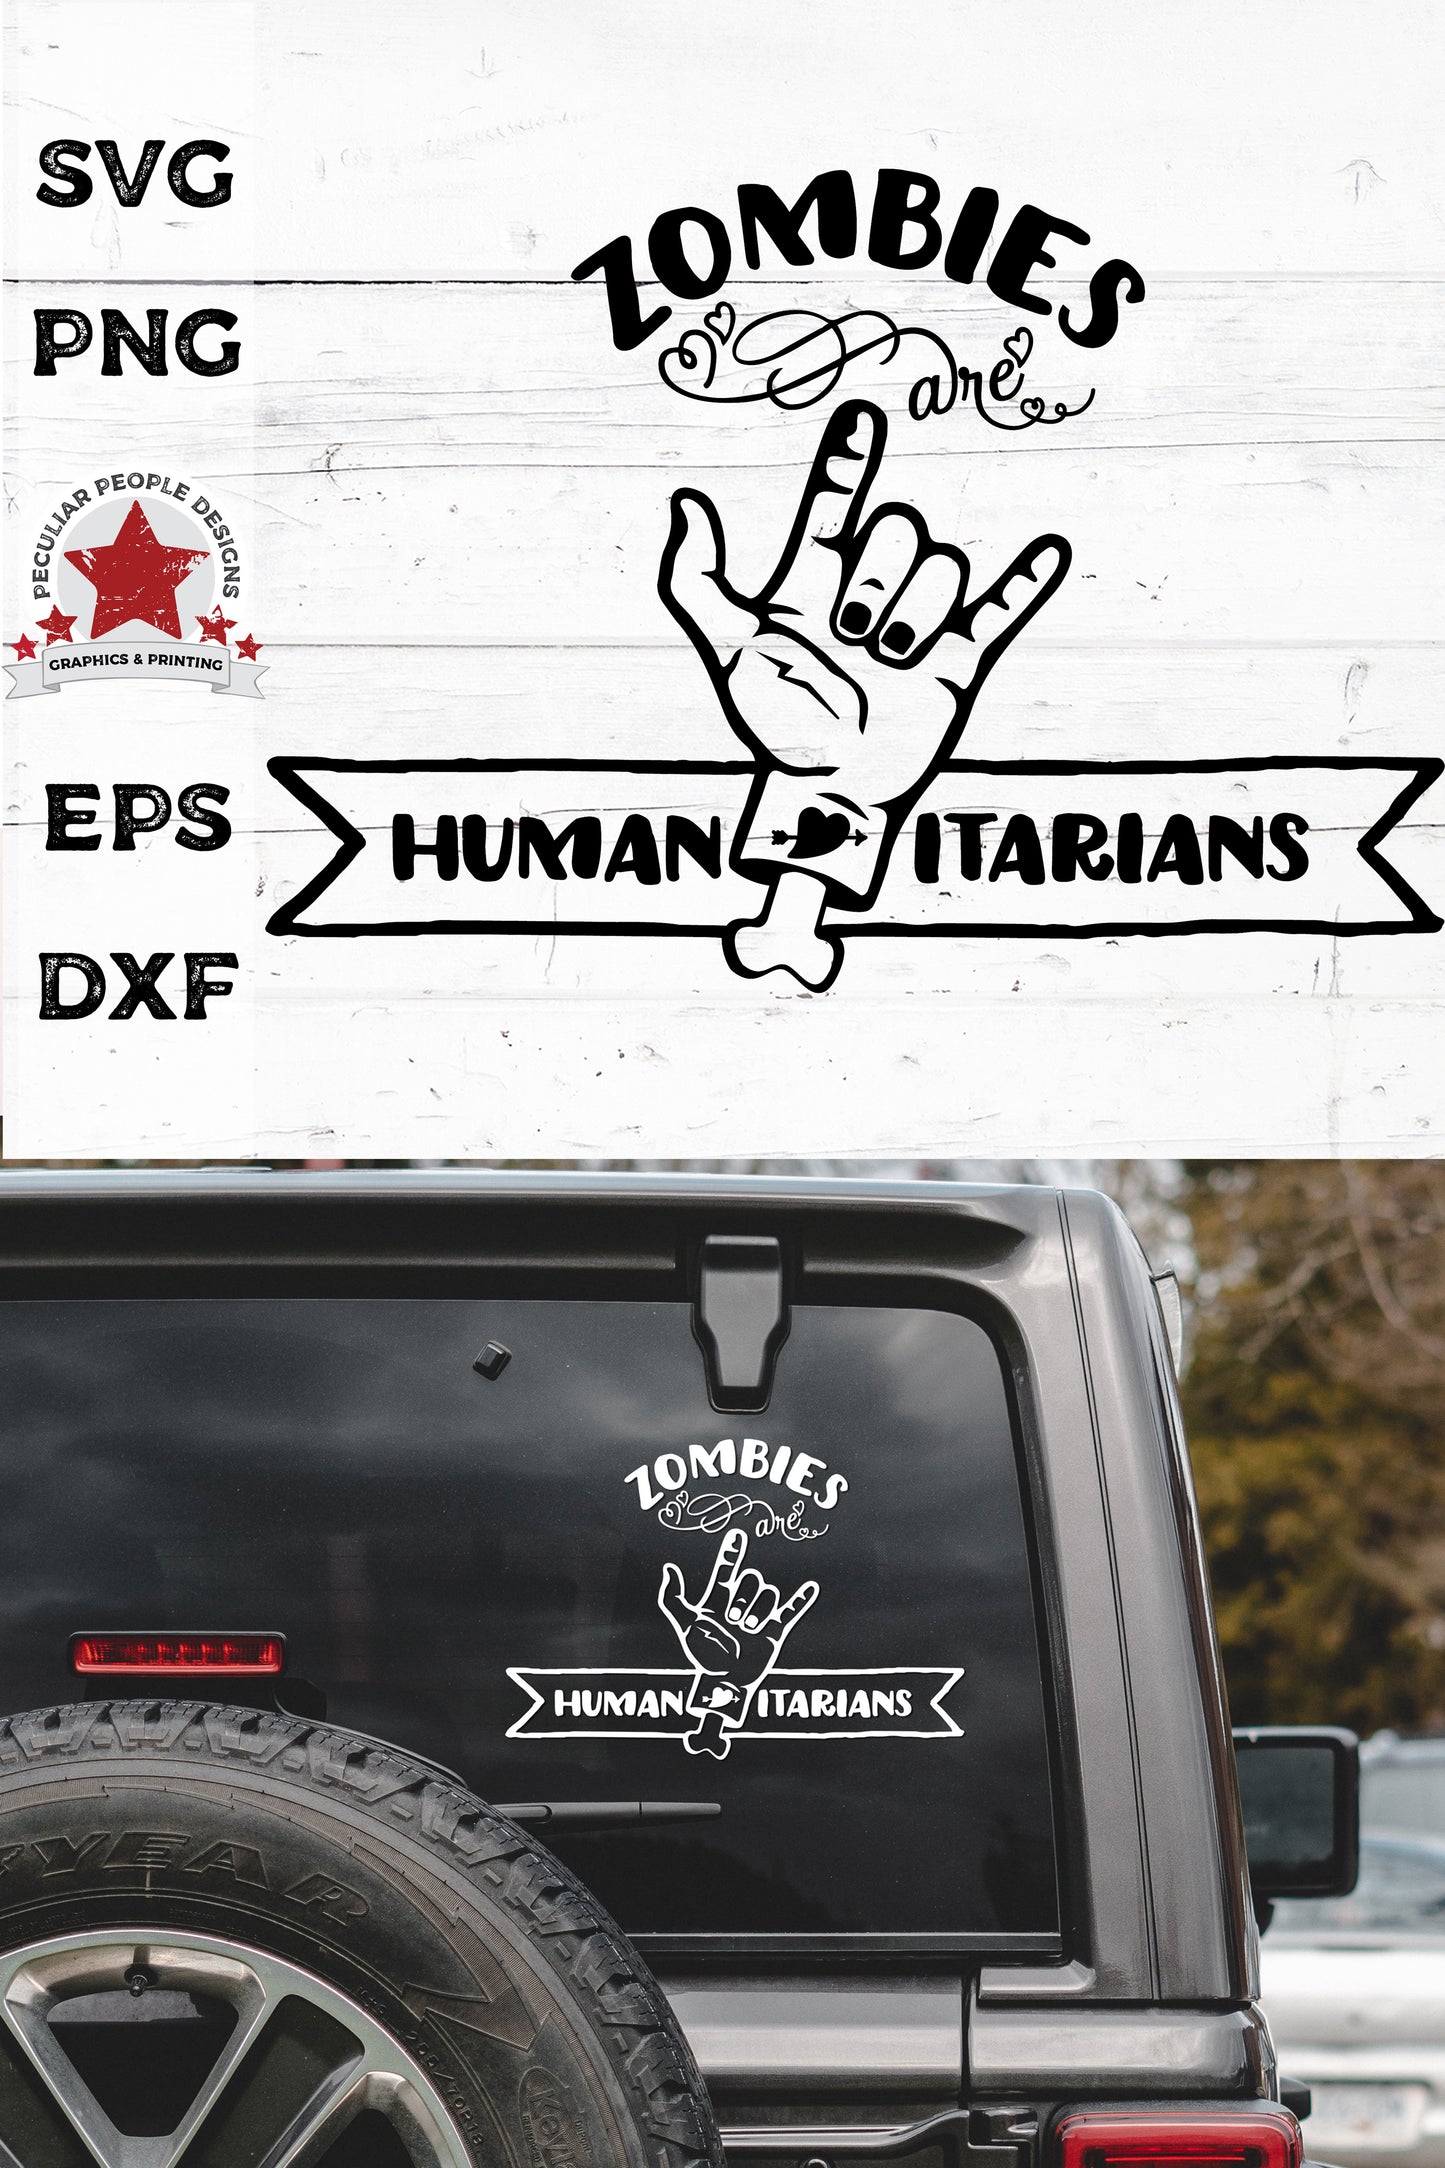 
                  
                    Zombies Are Humanitarians SVG shown a a car decal on the rear window of a black jeep
                  
                